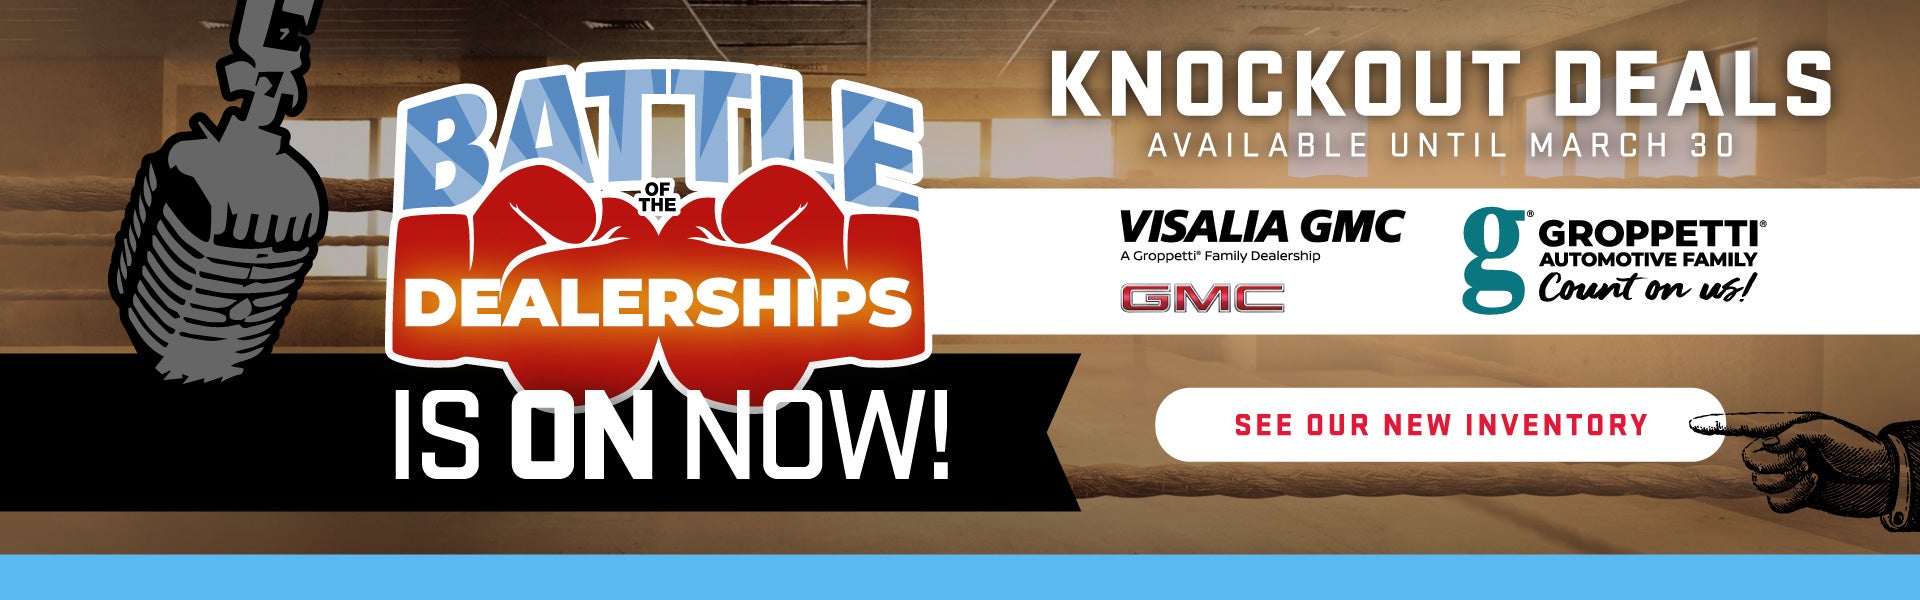 Battle of the Dealerships is ON NOW! Only at Visalia GMC!